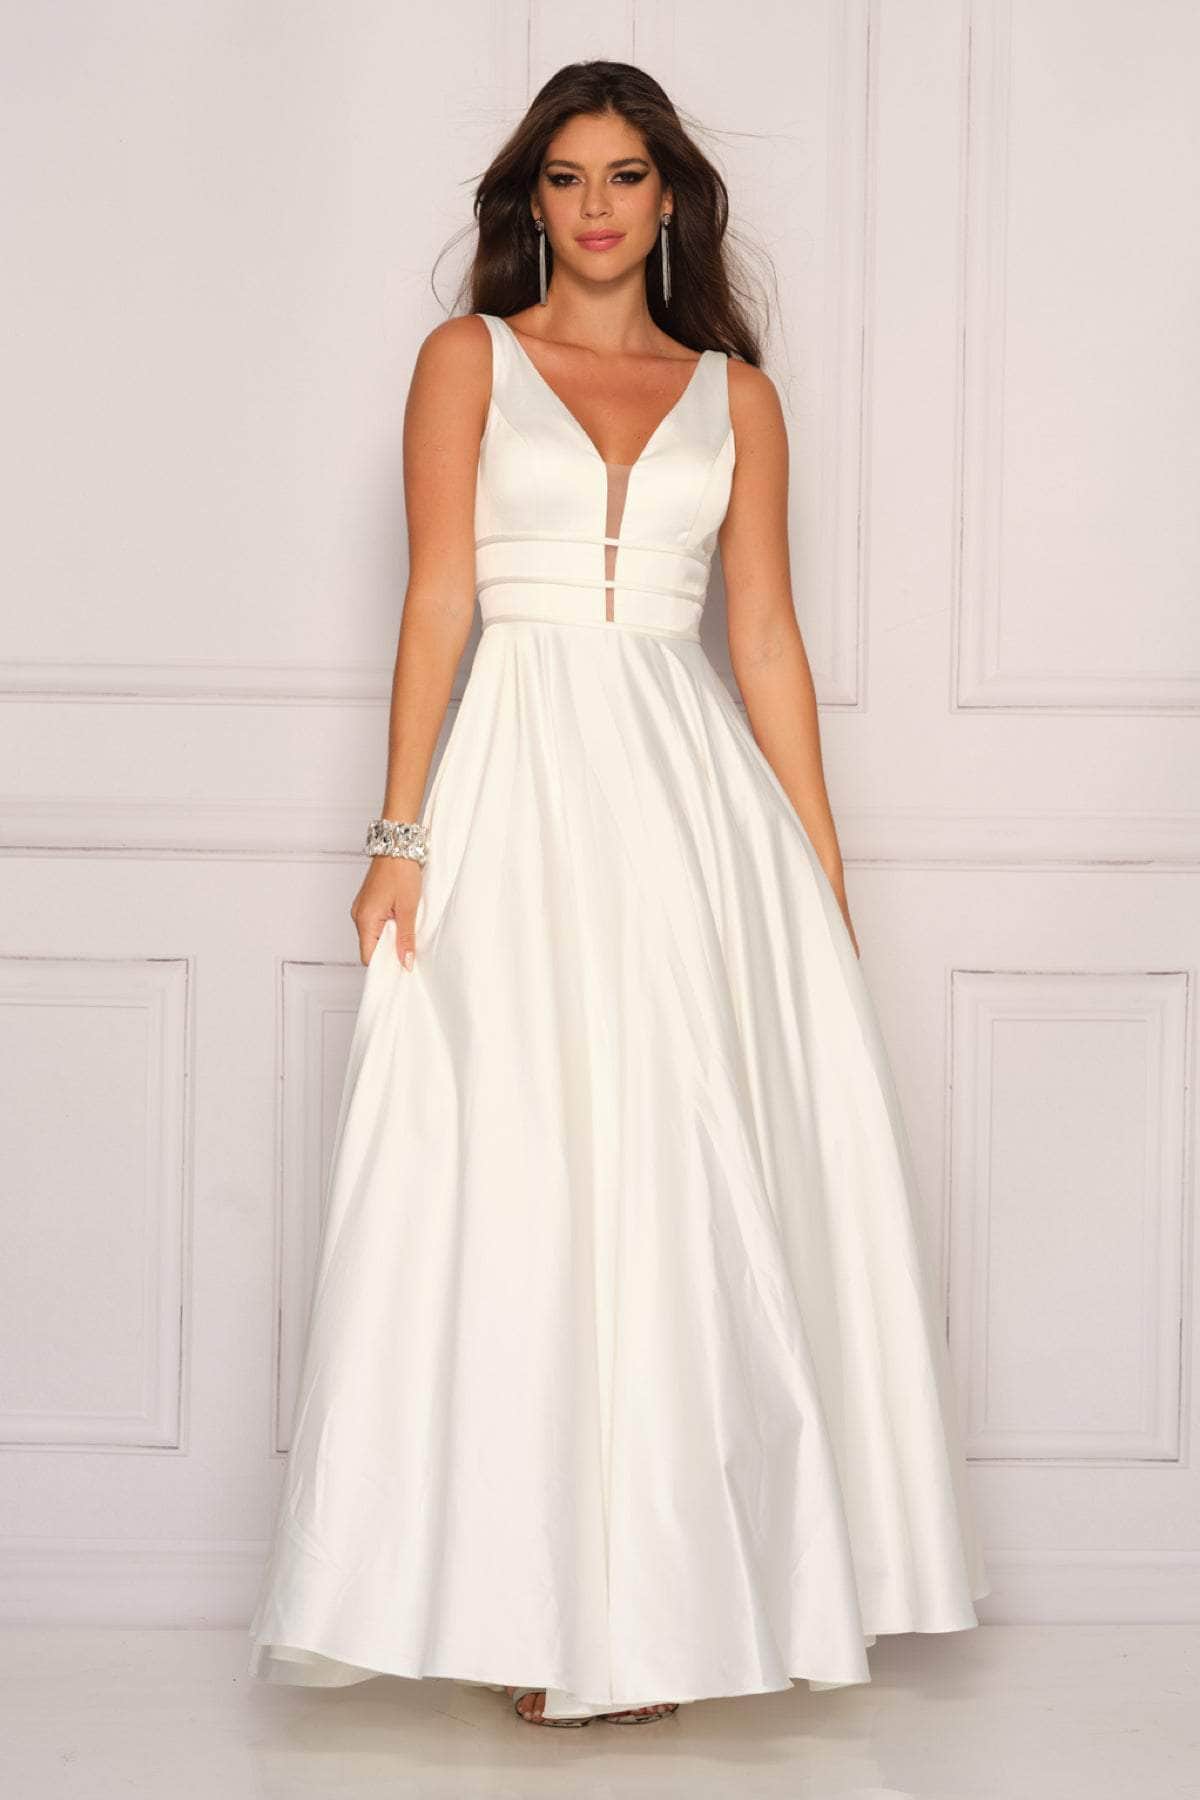 Dave & Johnny 10971 - Satin Sleeveless Bridal Gown Special Occasion Dresses